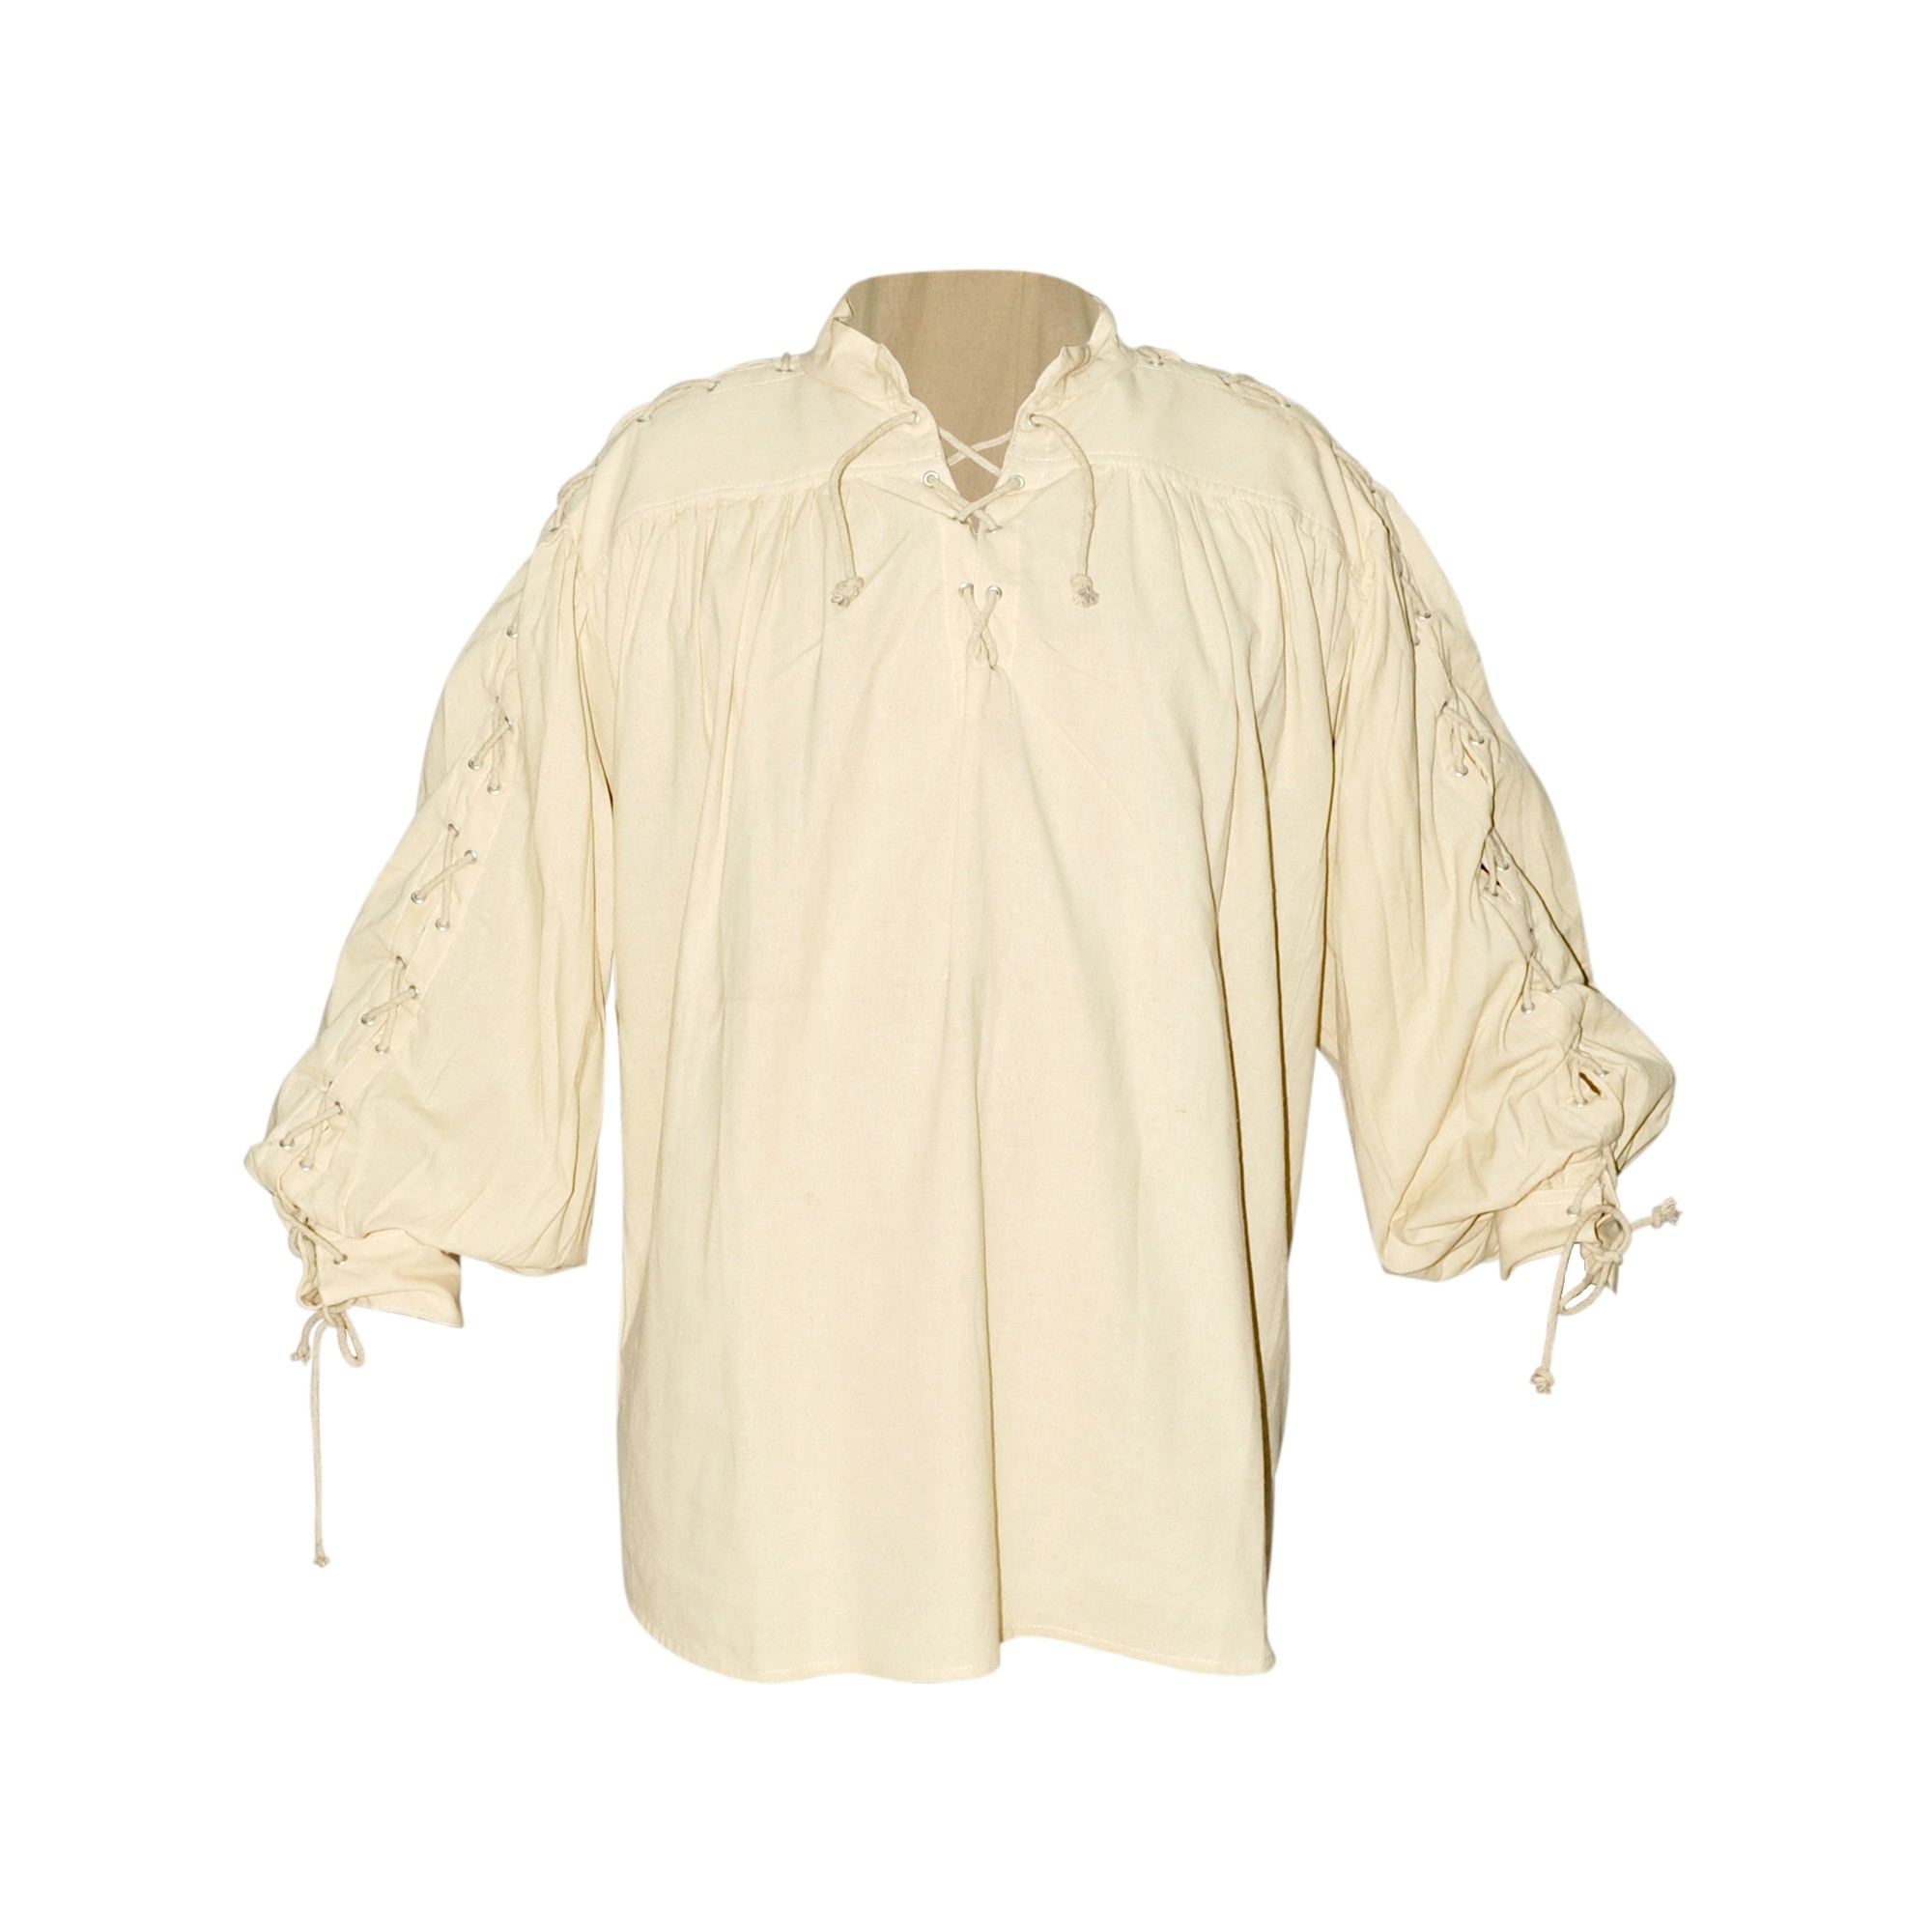 Cotton Shirt, Collarless, Laced Neck&Sleeves, Natural